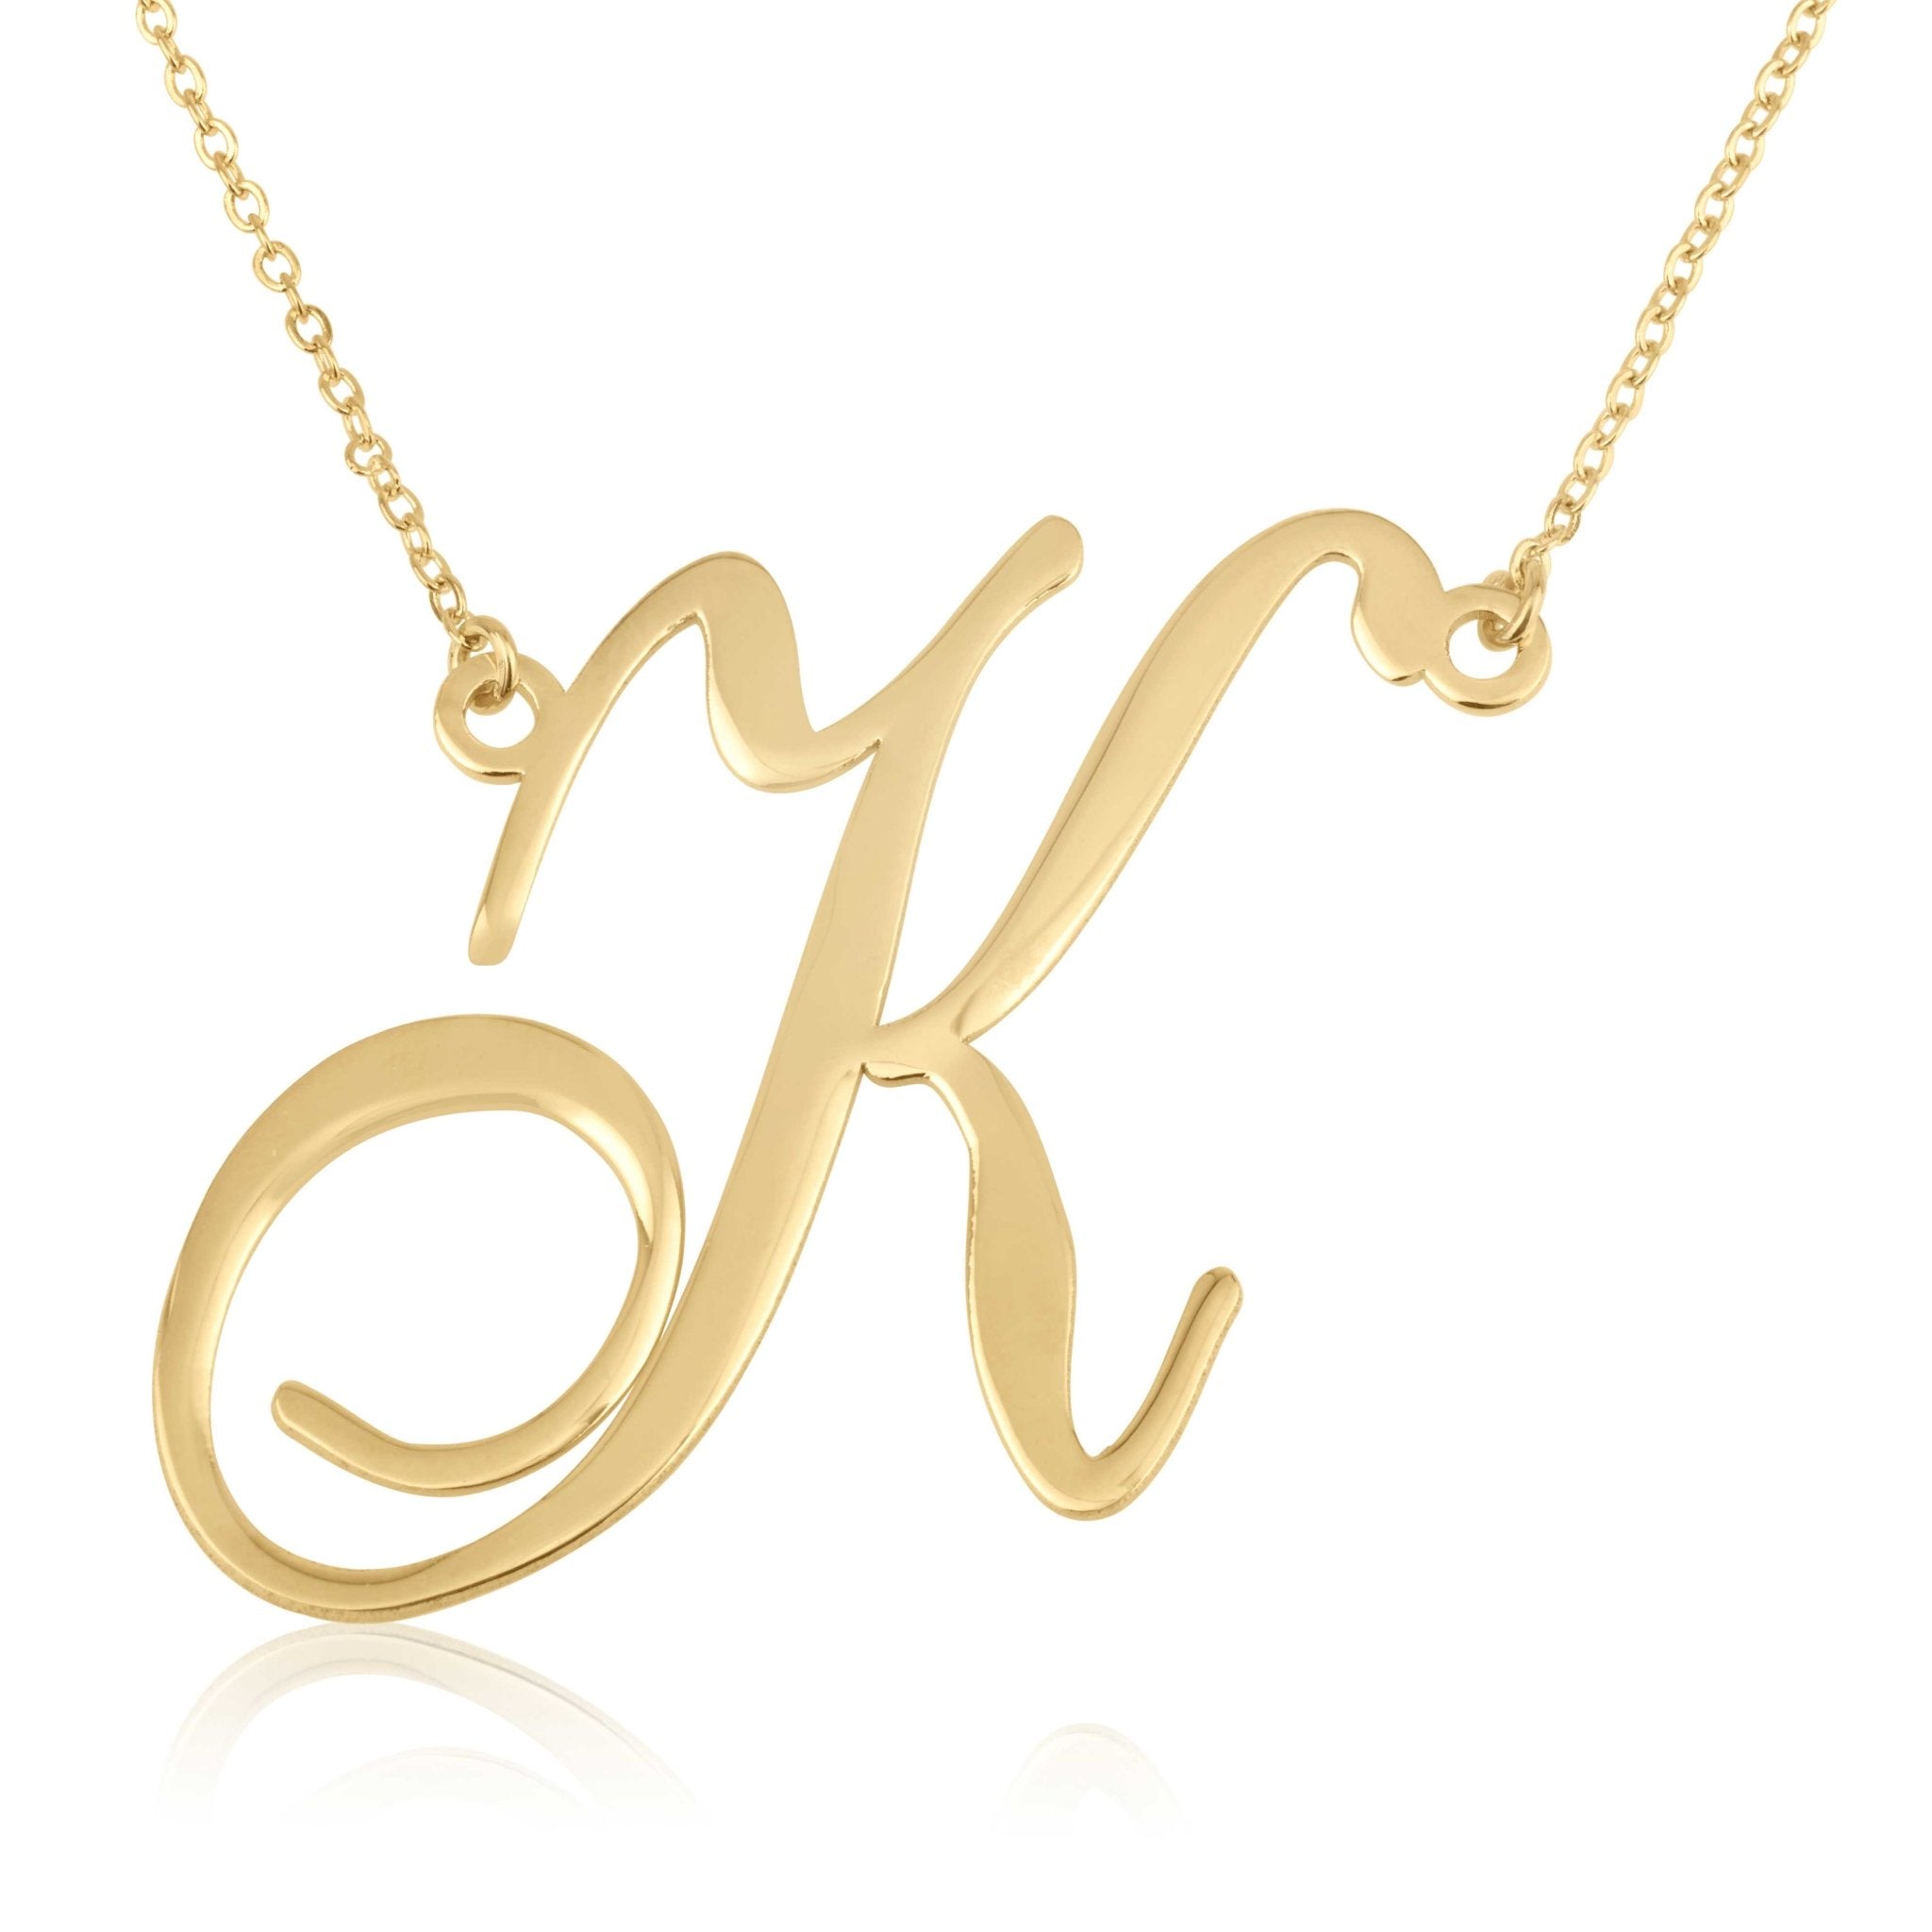 large initial necklace in cursive font